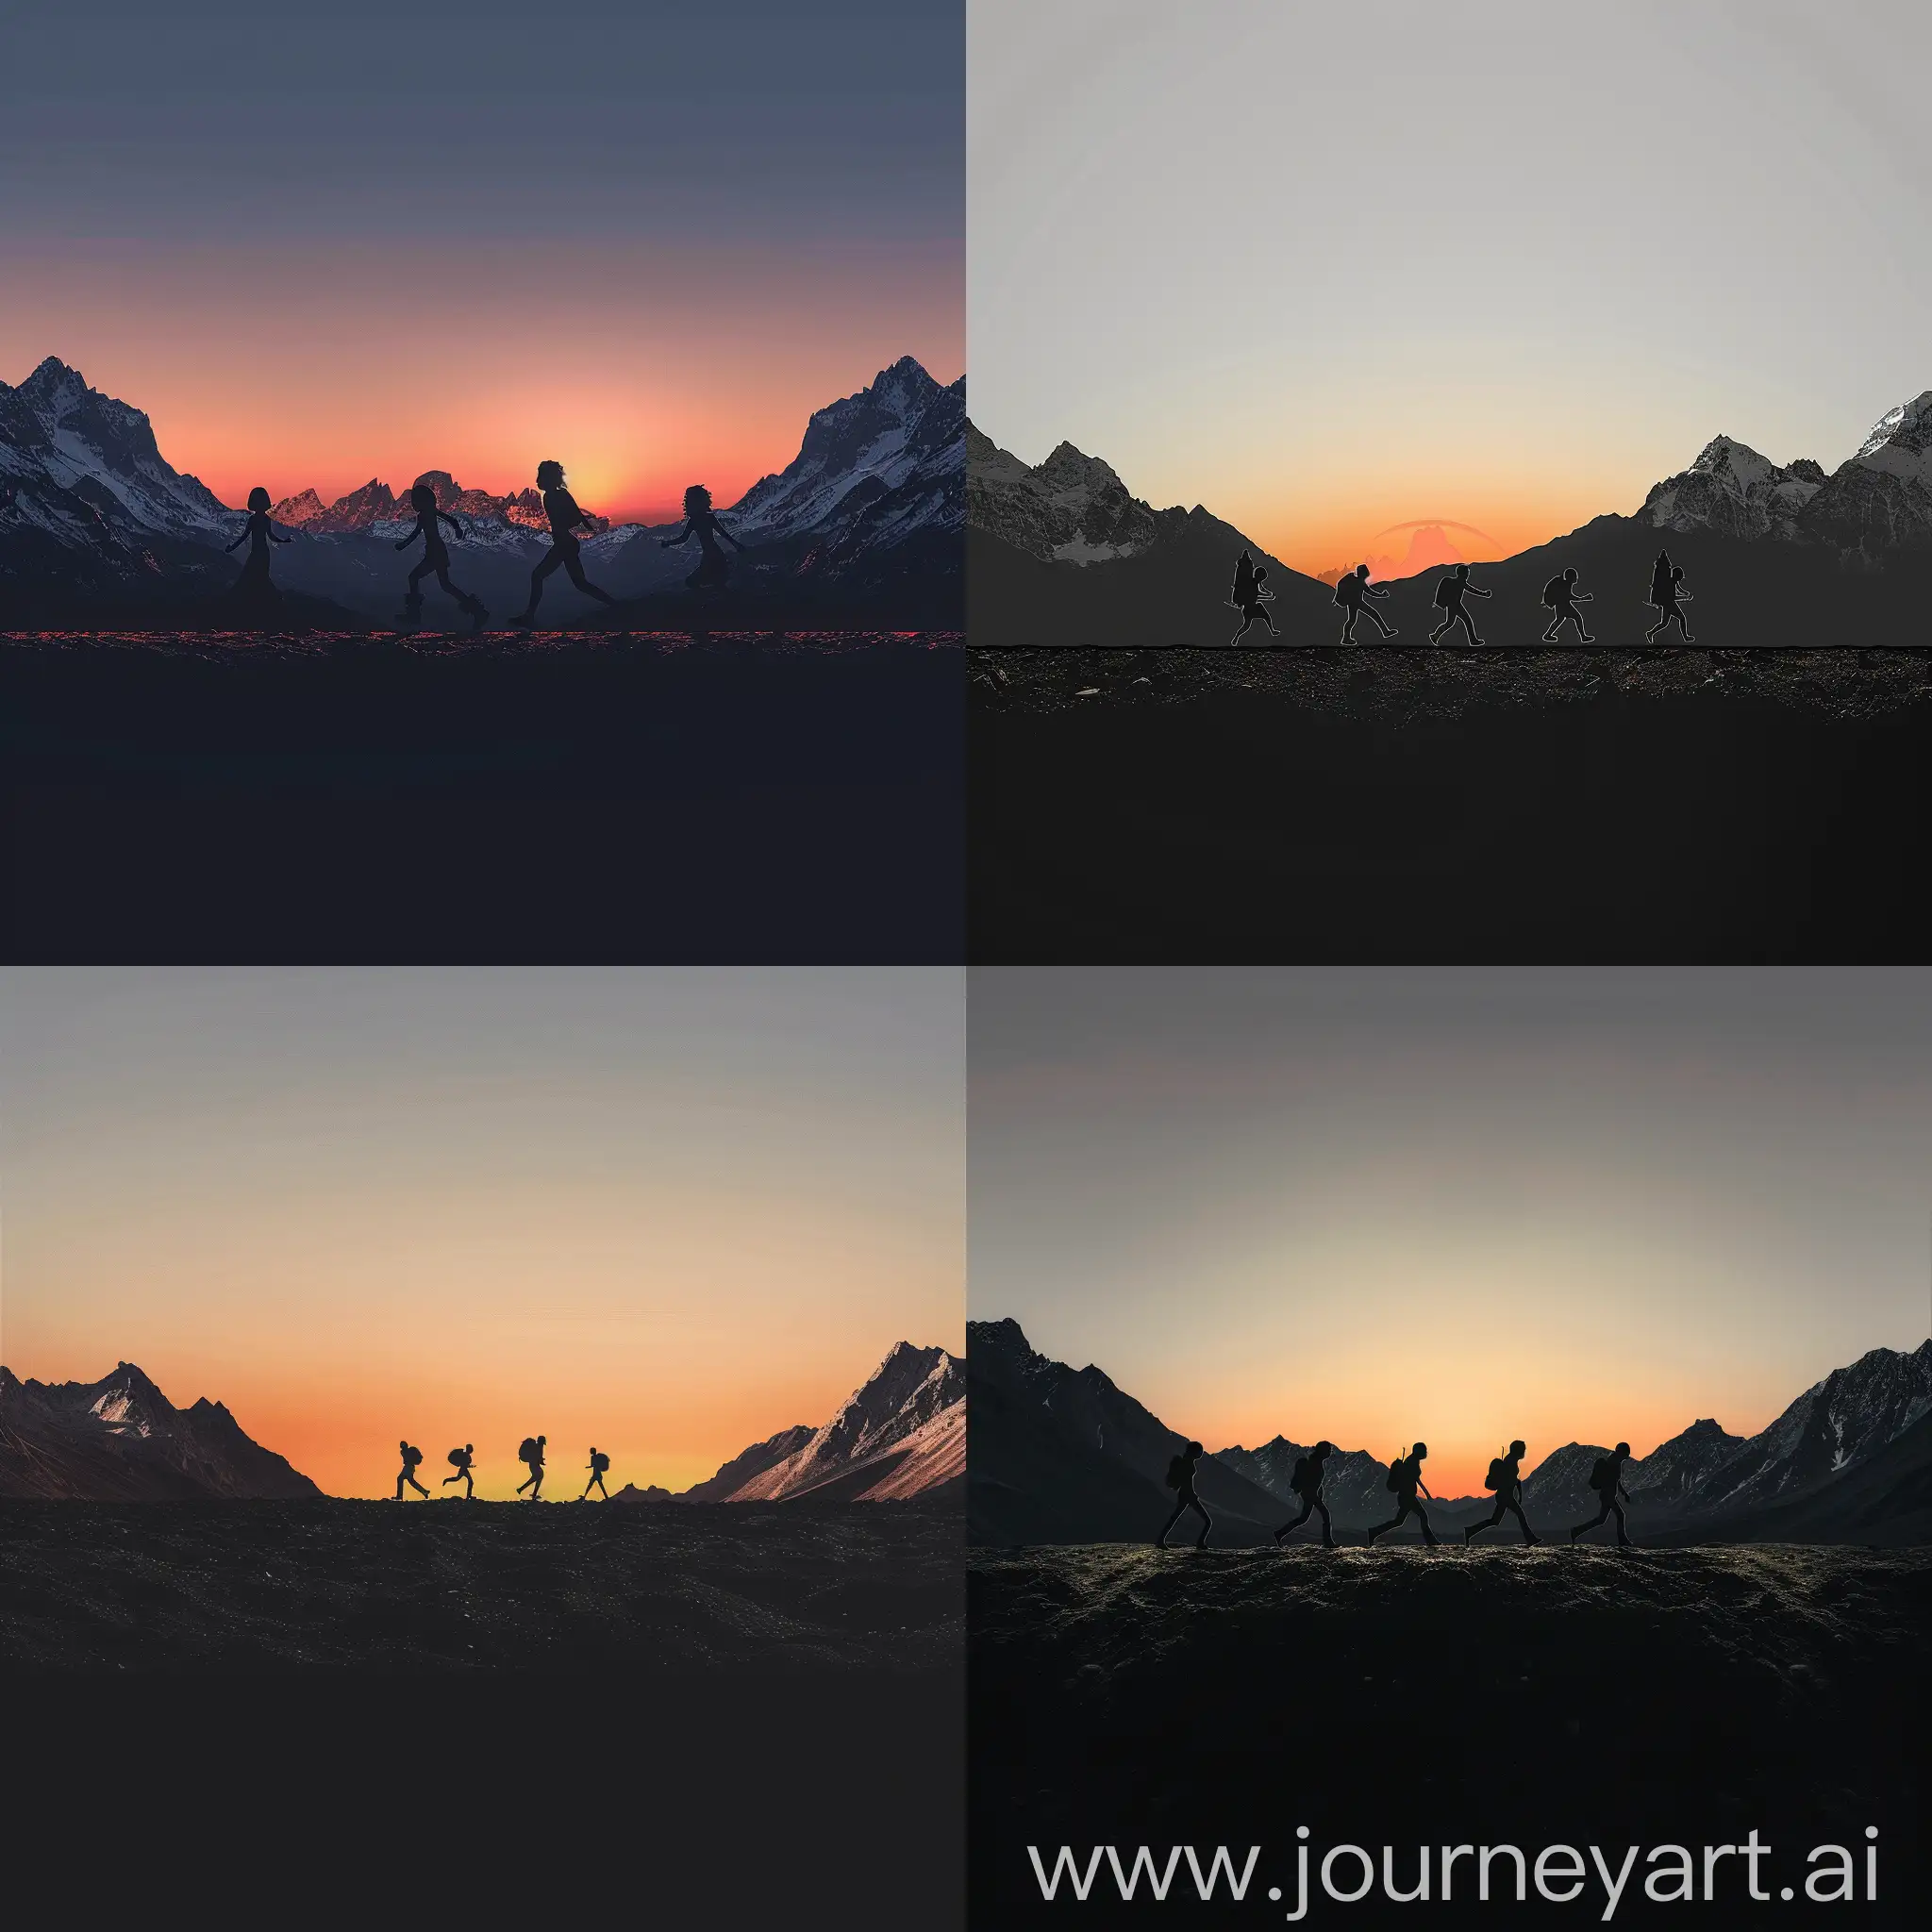 Fantasy-Travelers-Silhouettes-at-Sunset-Mountain-Pass